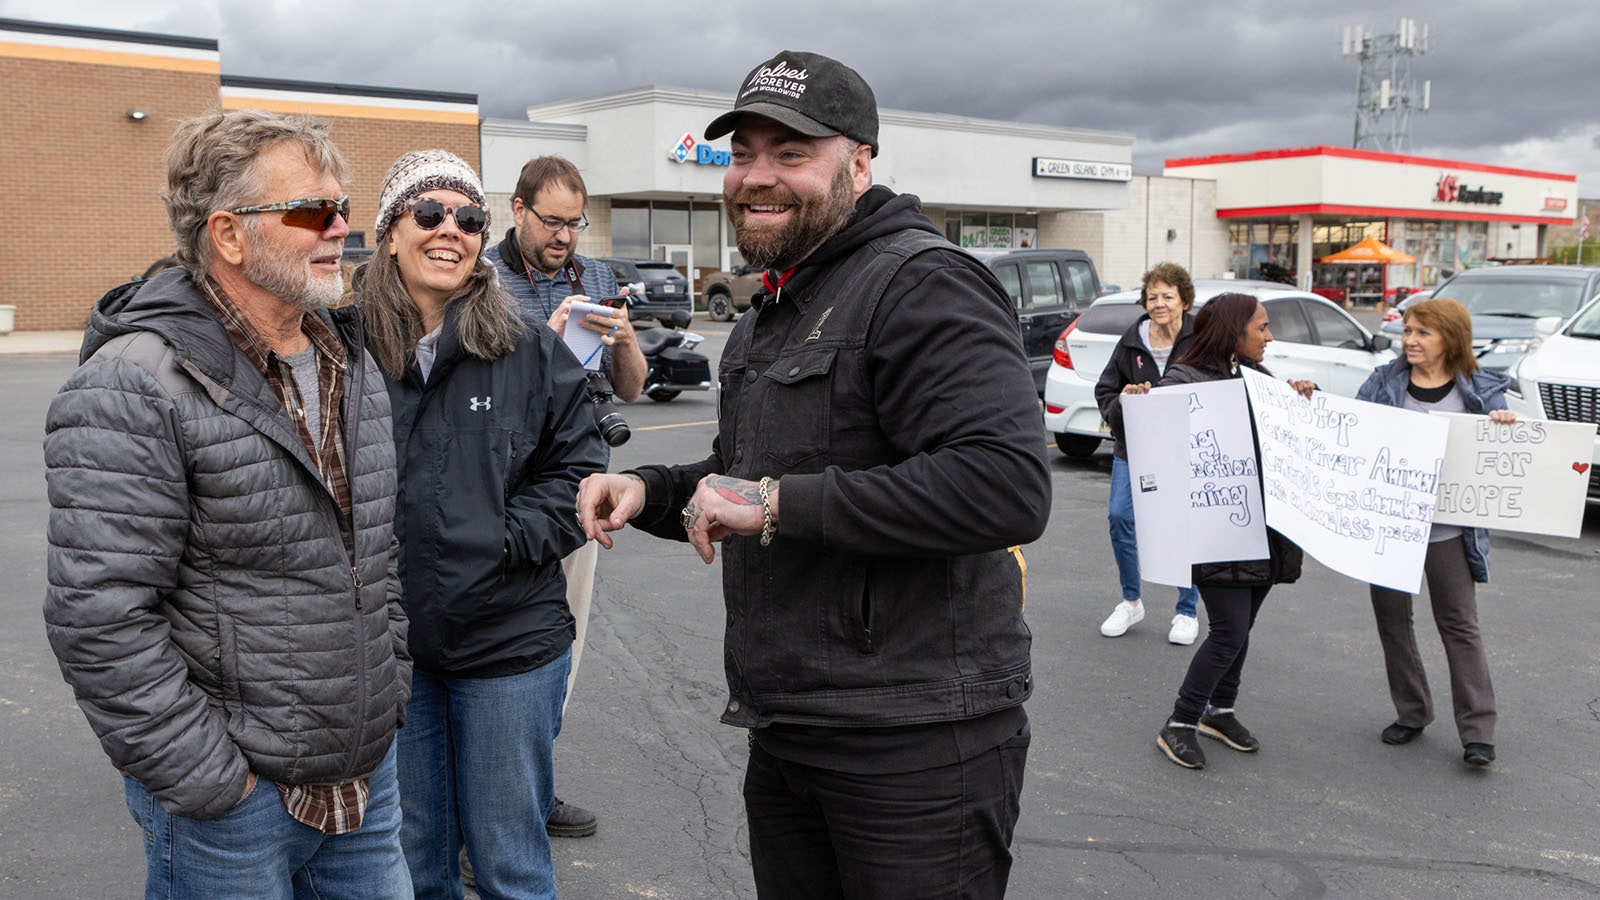 Jonas Black, organizer of the Hogs for Hope motorcycle rally, talks with rally supporters at the Flaming Gorge Harley-Davidson in Green River, Wyoming, on May 25, 2024.